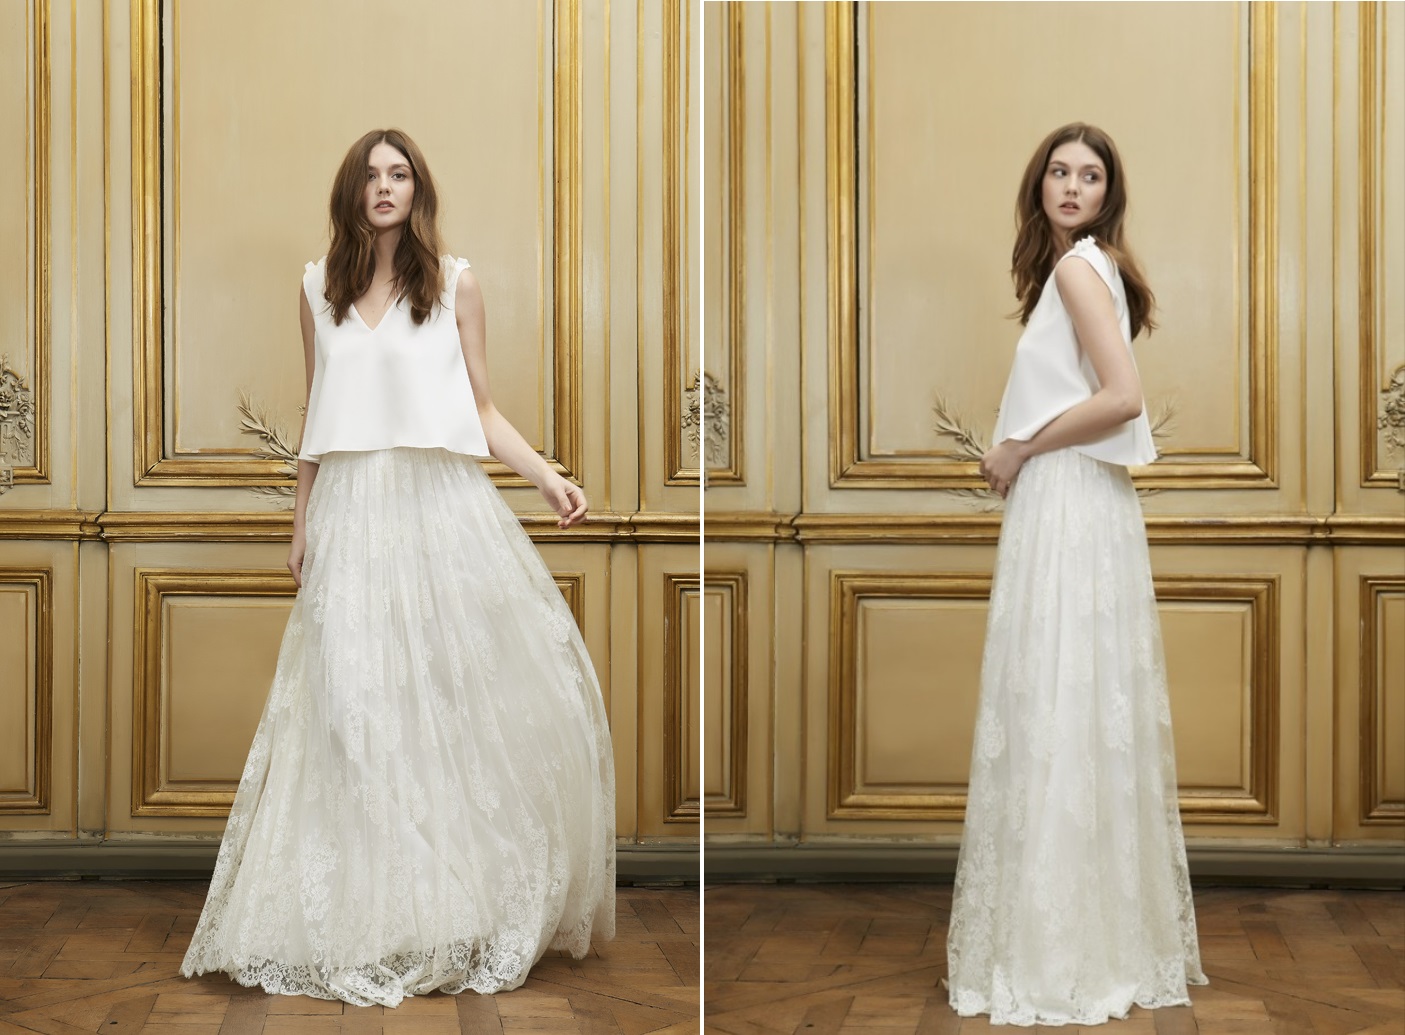 The 2015 Bridal Collection from Delphine Manivet - Yuko Top and Robinson Skirt